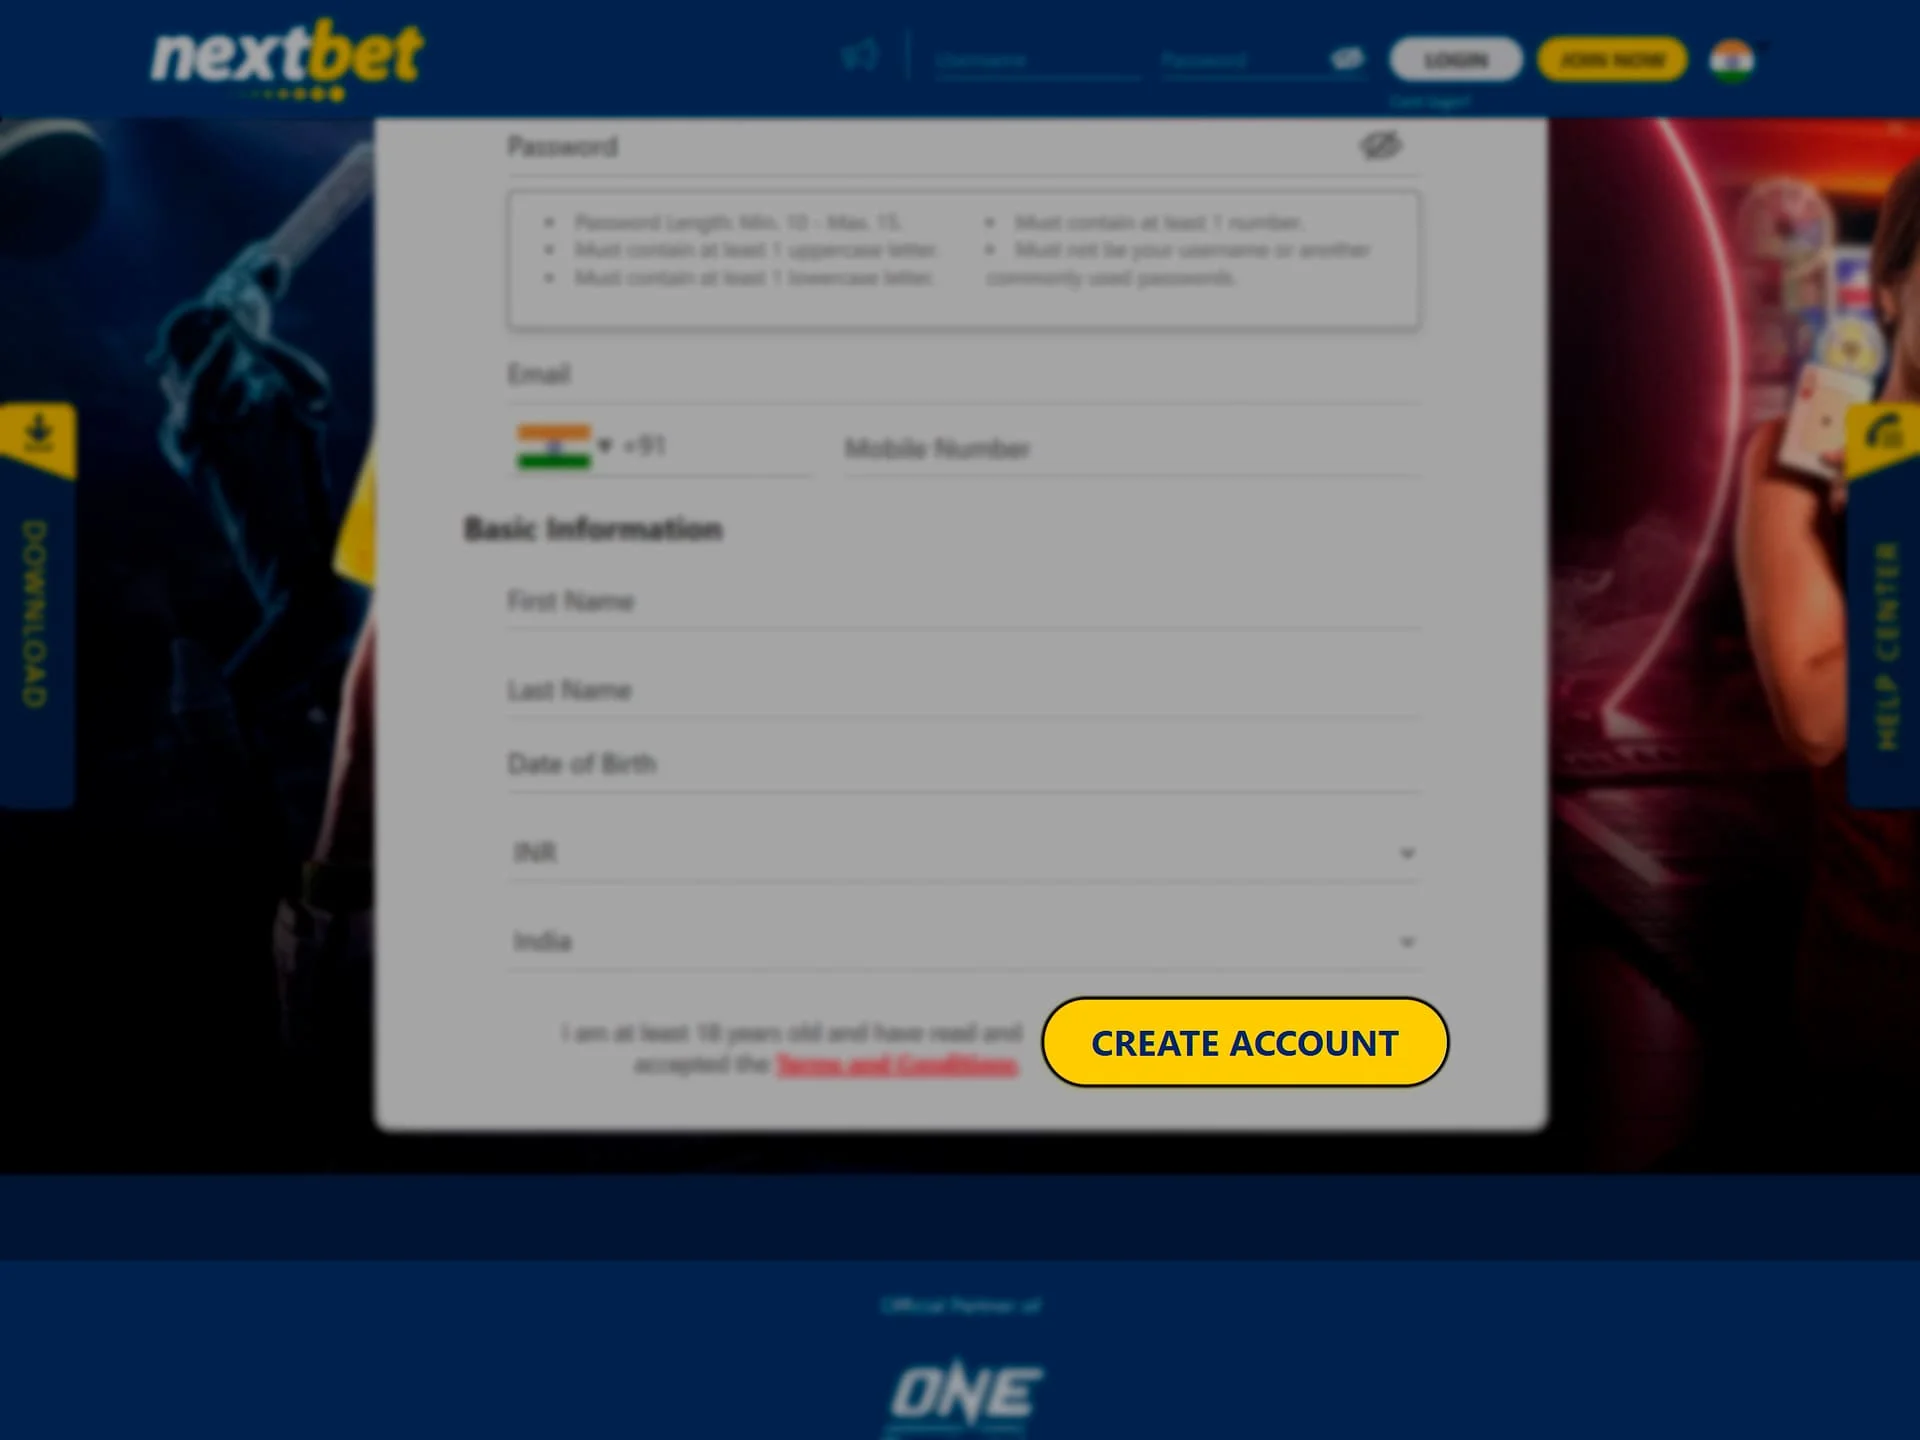 Check the correctness of the entered data and confirm the Nextbet account creation.